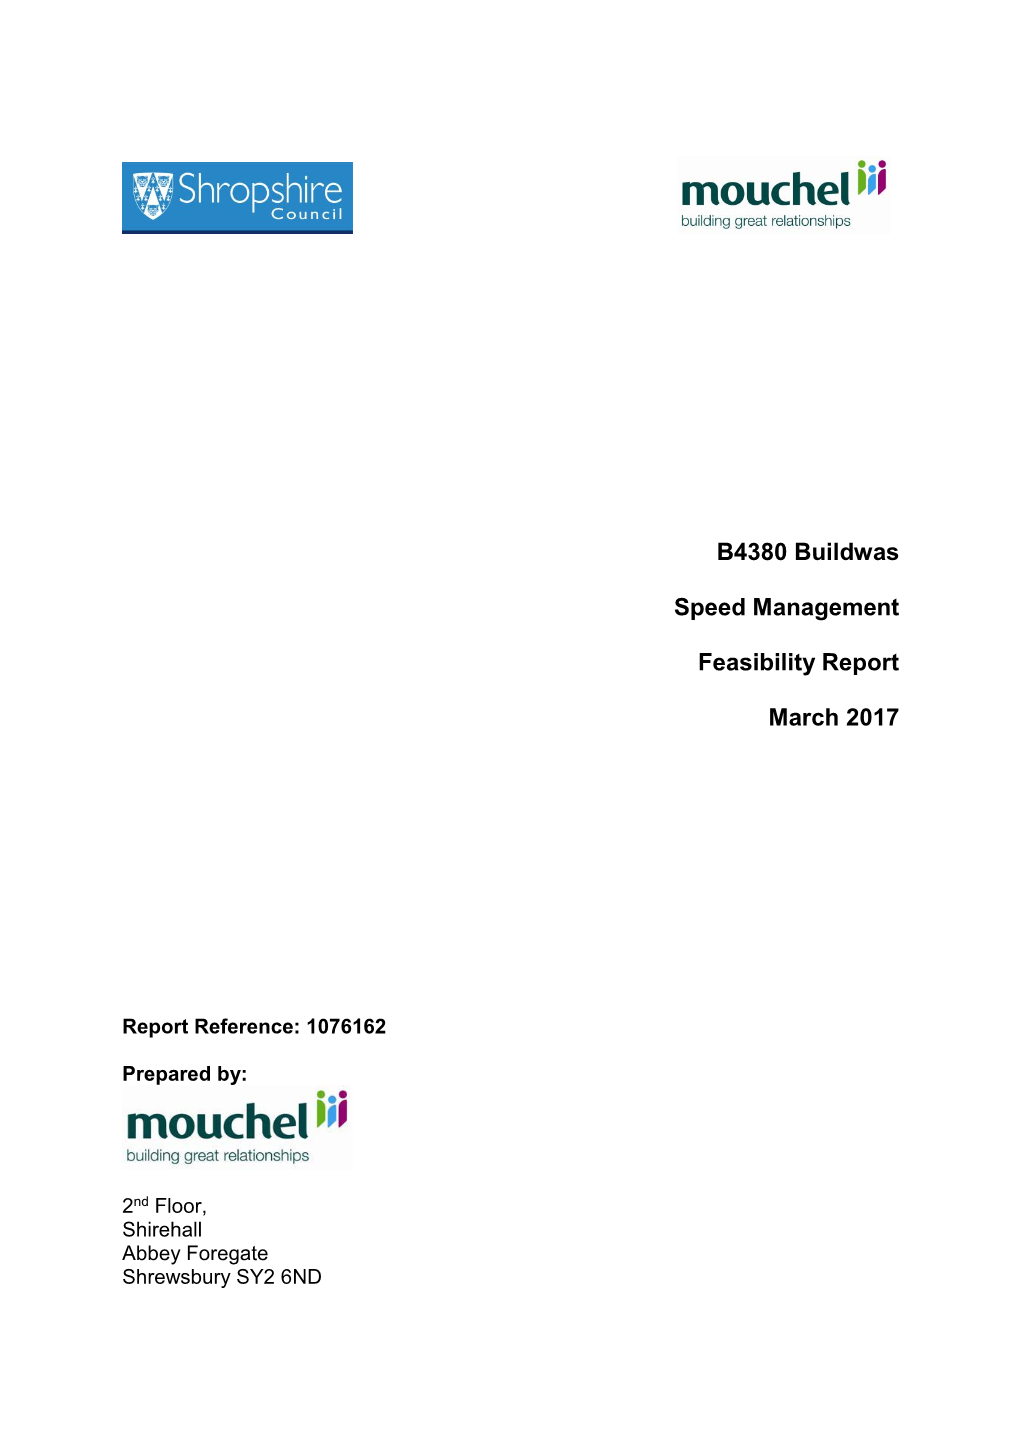 B4380 Buildwas Speed Management Feasibility Report March 2017